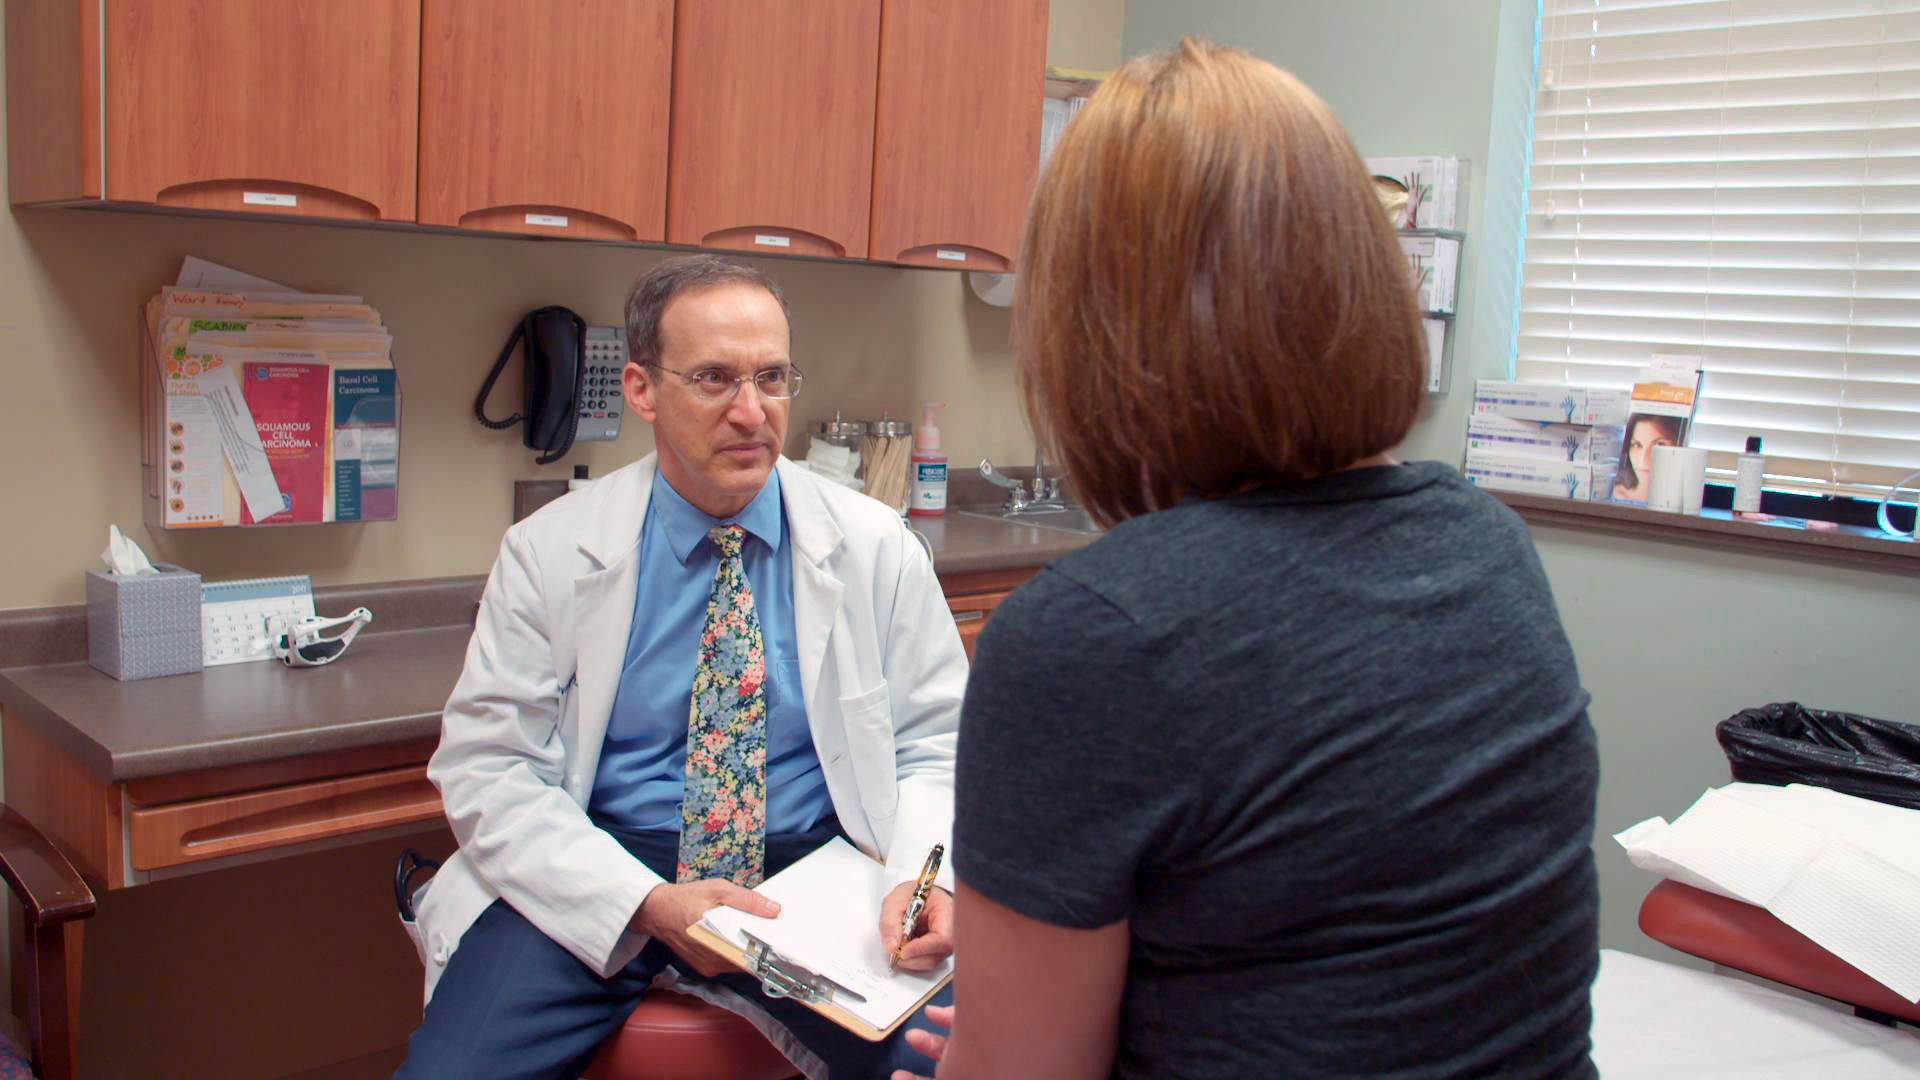  Dr. Steve Feldman is a dermatologist who examines Morgellons patients and attends the Morgellons conference in the documentary “Skin Deep, the Battle over Morgellons.” 